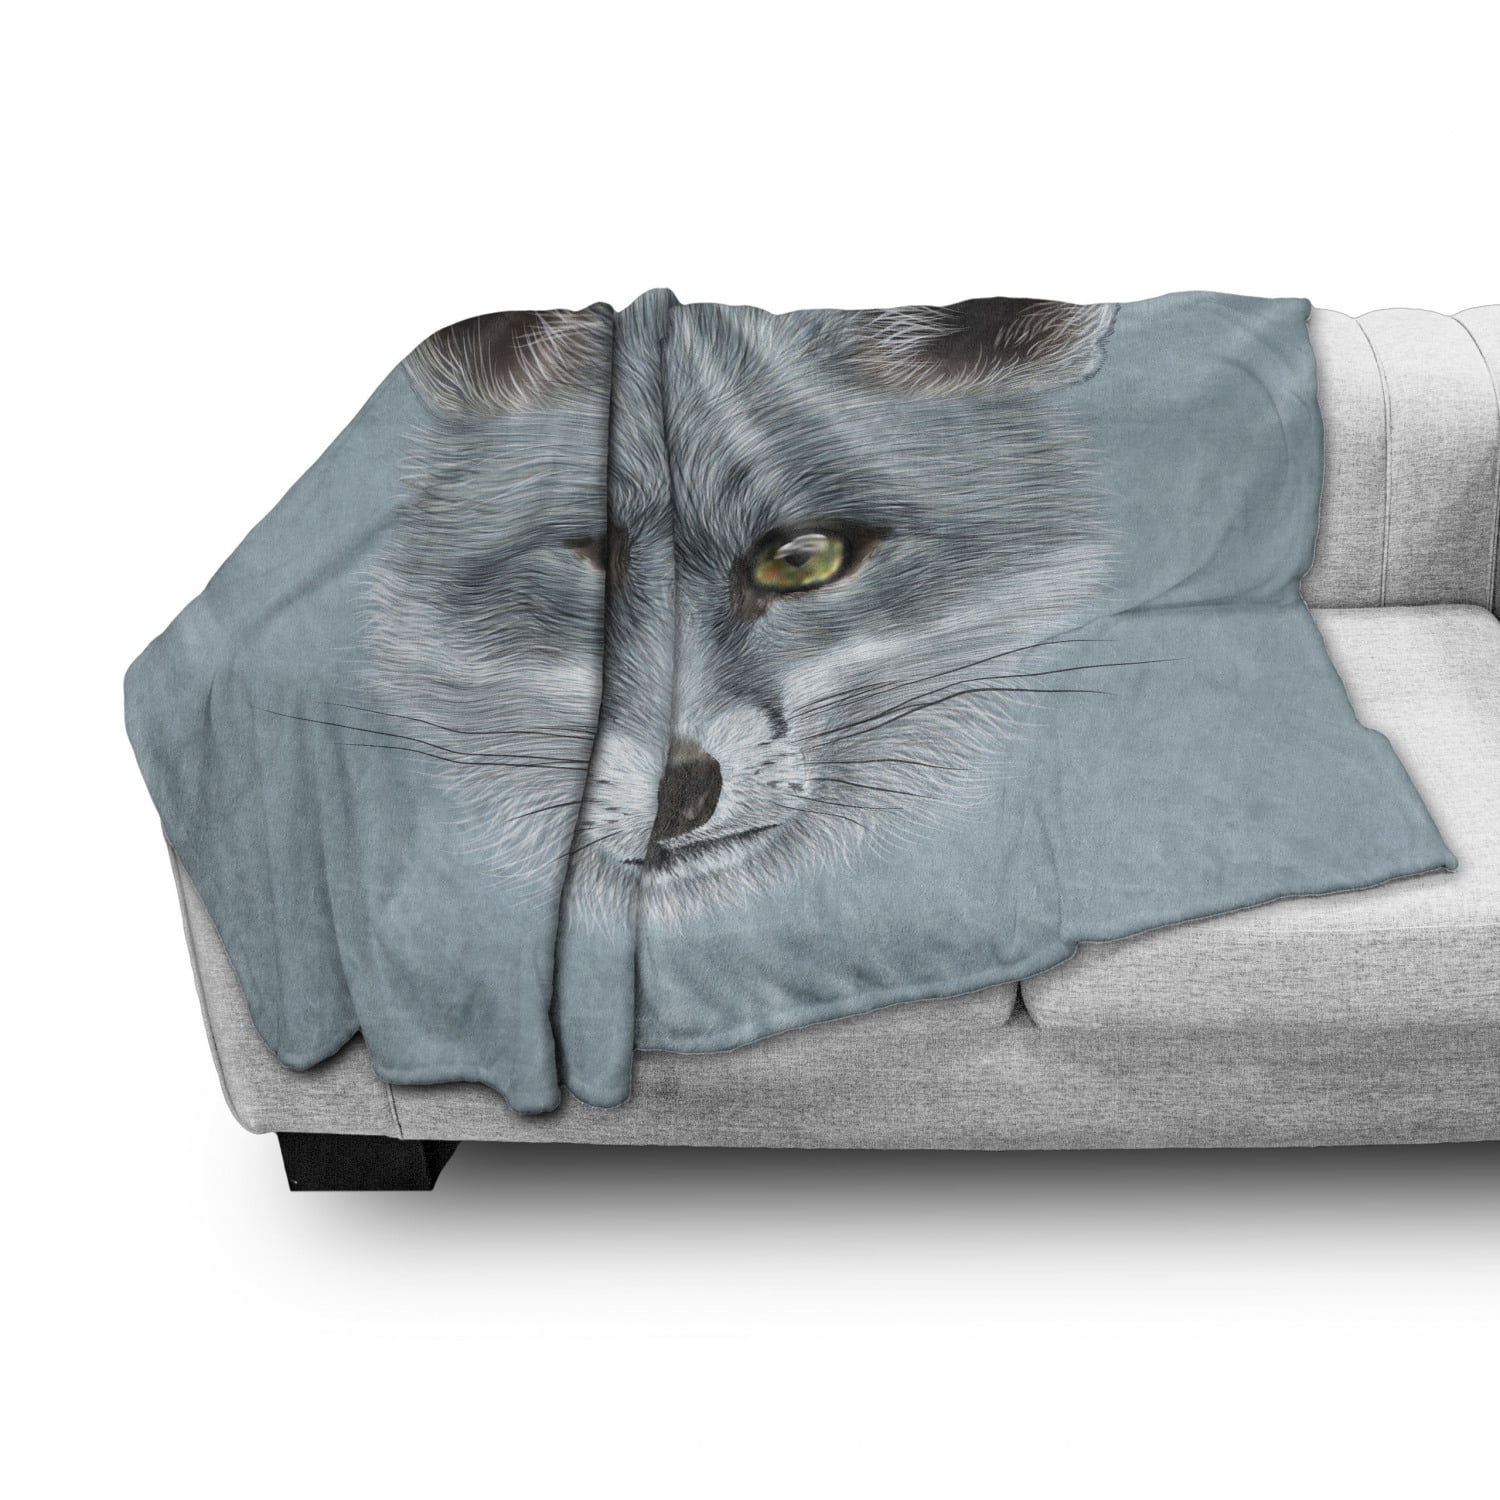 Ambesonne Animal Soft Flannel Fleece Throw Blanket Grey Fox Portrait Fluffy Forest Creature Mammal Wildlife Style Illustration Cozy Plush for Indoor and Outdoor Use Pale Blue 50 x 60